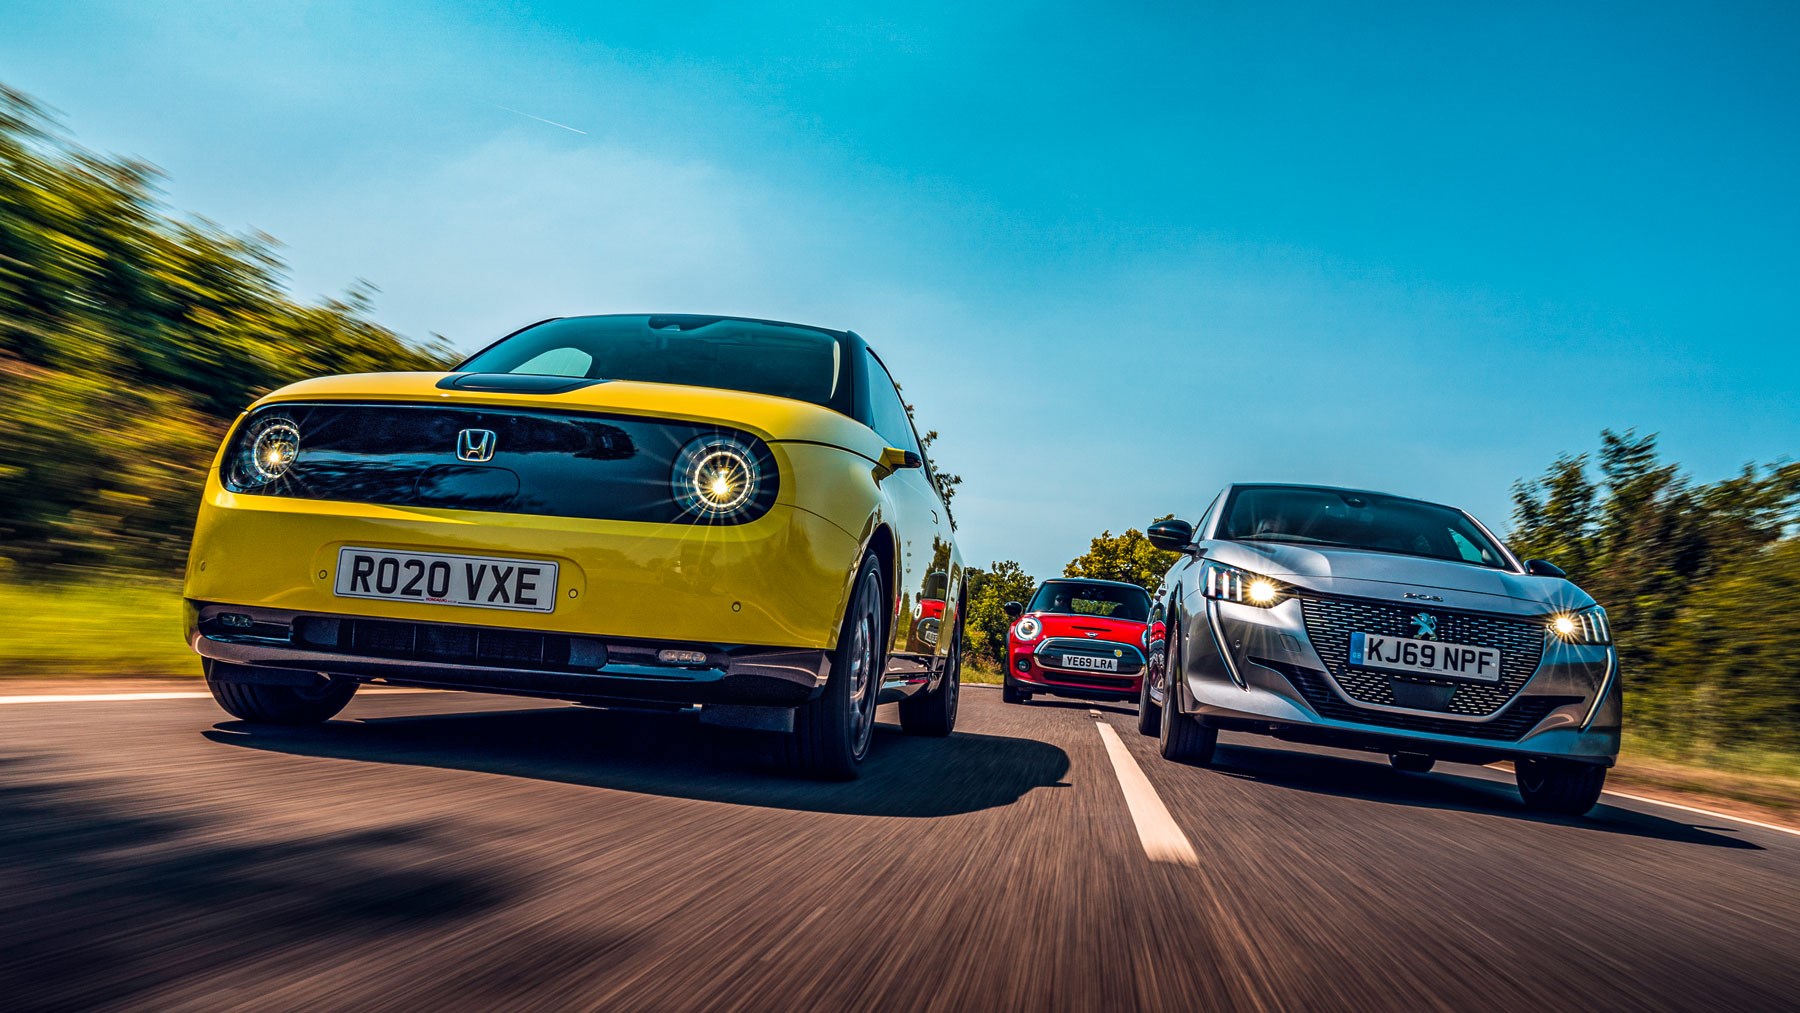 Peugeot 208 to electrify Europe's small-car market